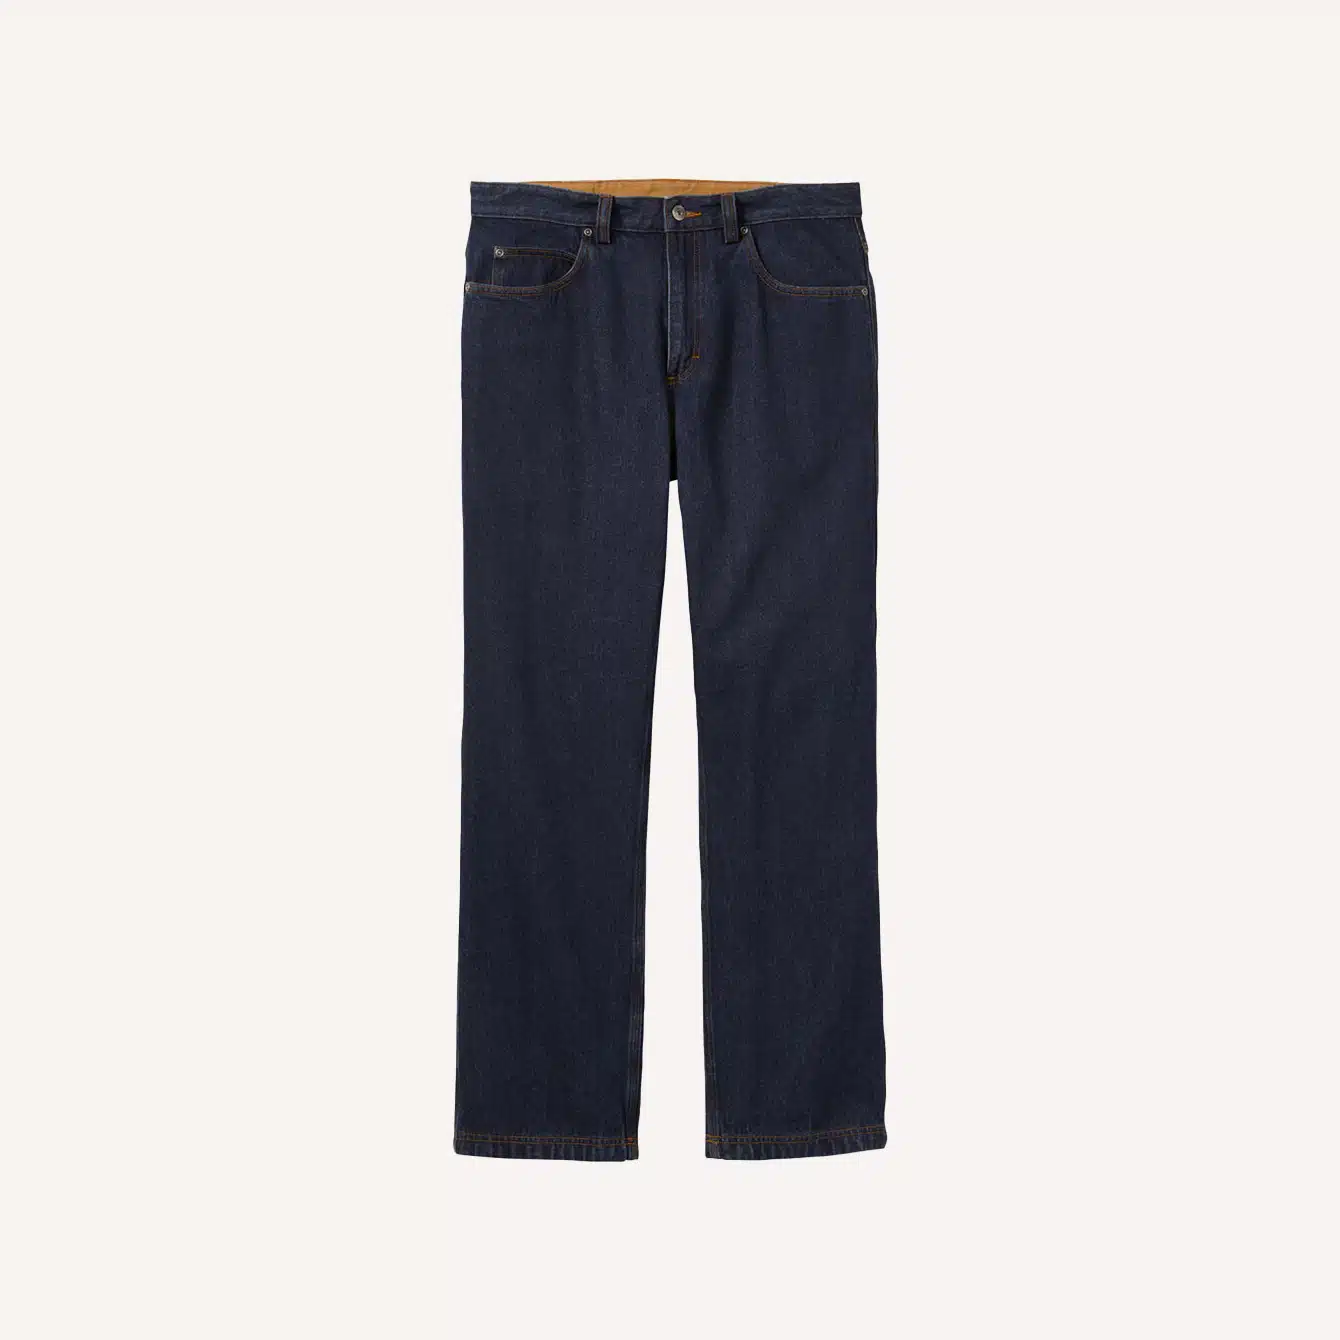 Duluth Trading Company Ballroom Relaxed Fit Jeans